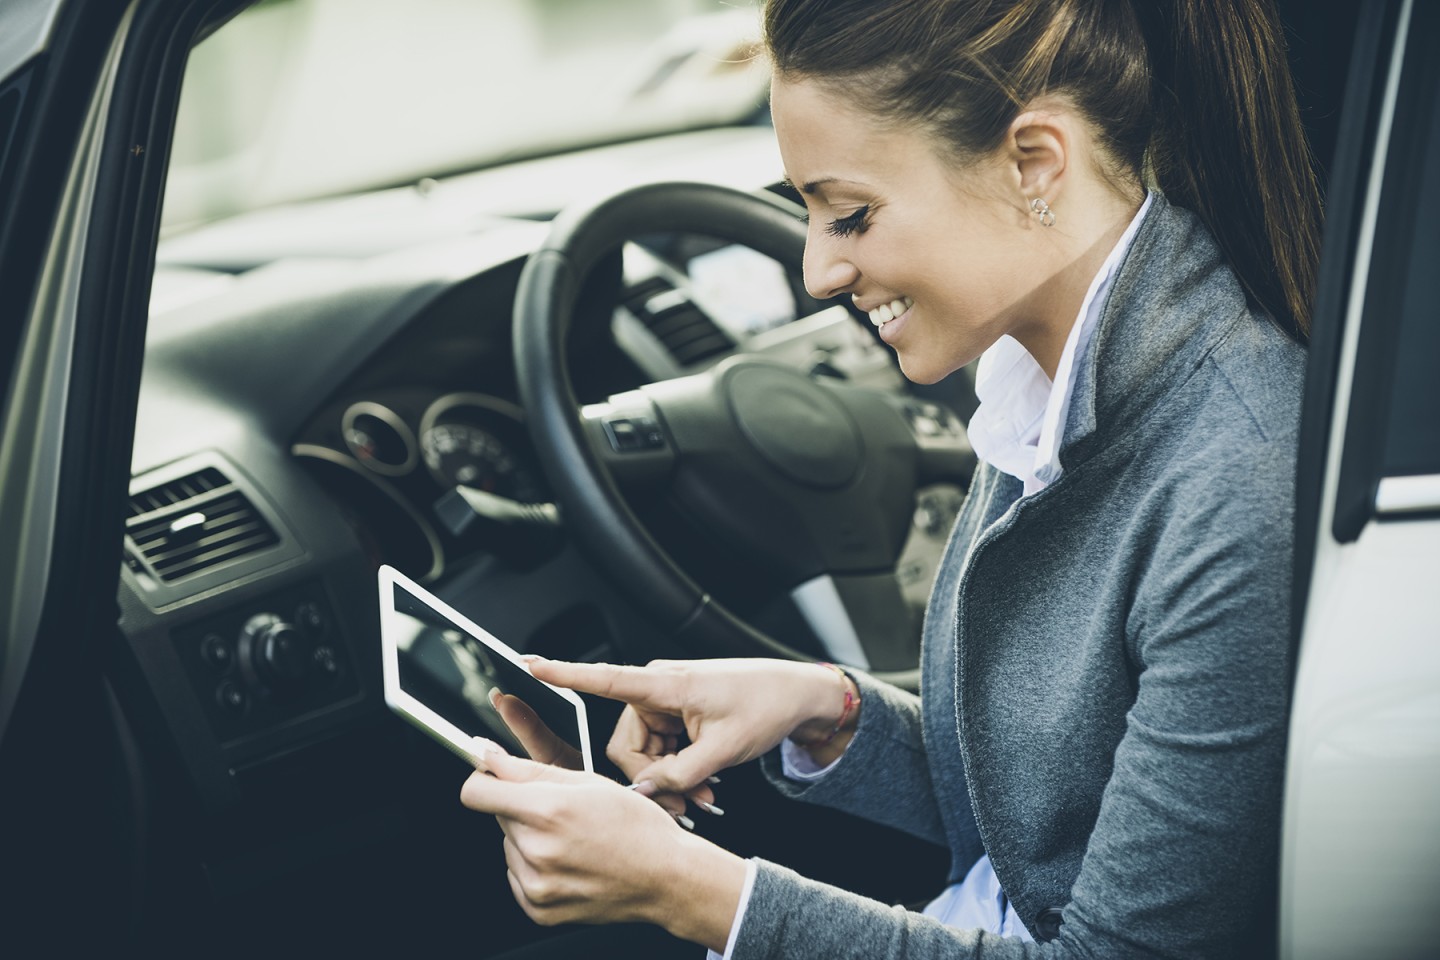 Smiling woman in a car with tablet